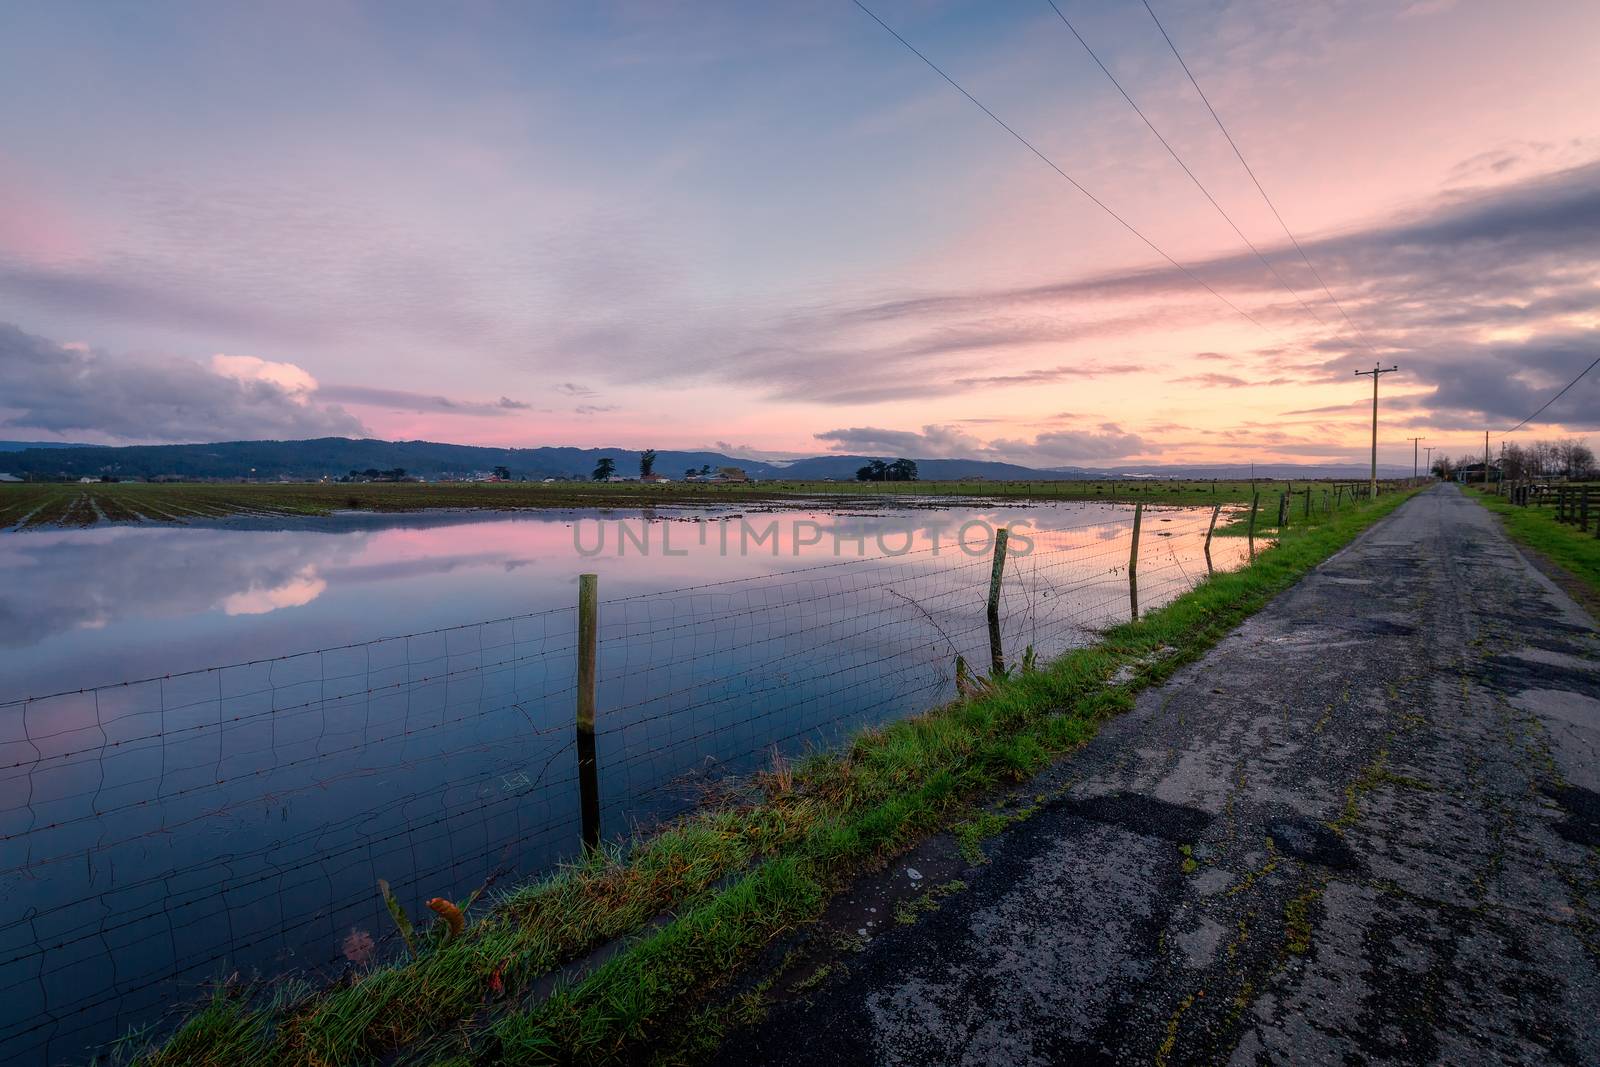 A flooded field along a country road at sunset.